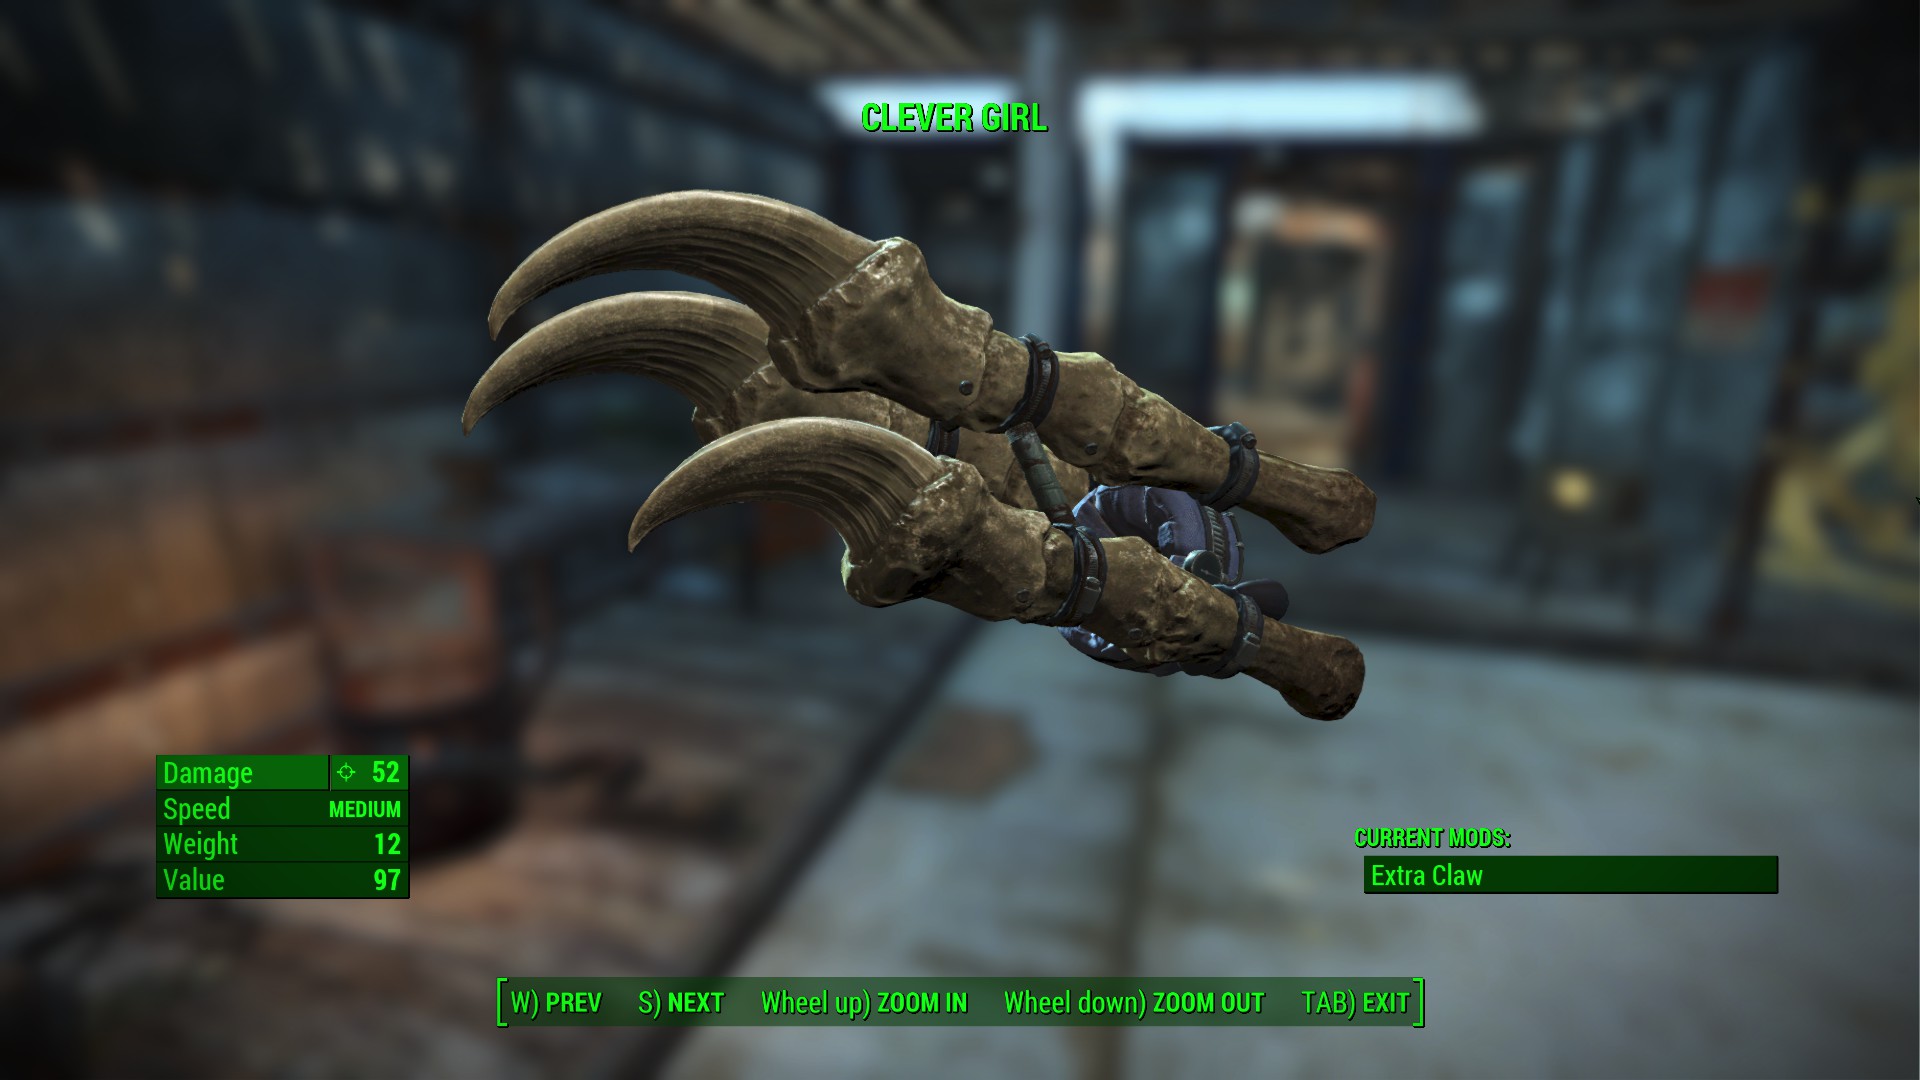 fallout 4 melee speed mod